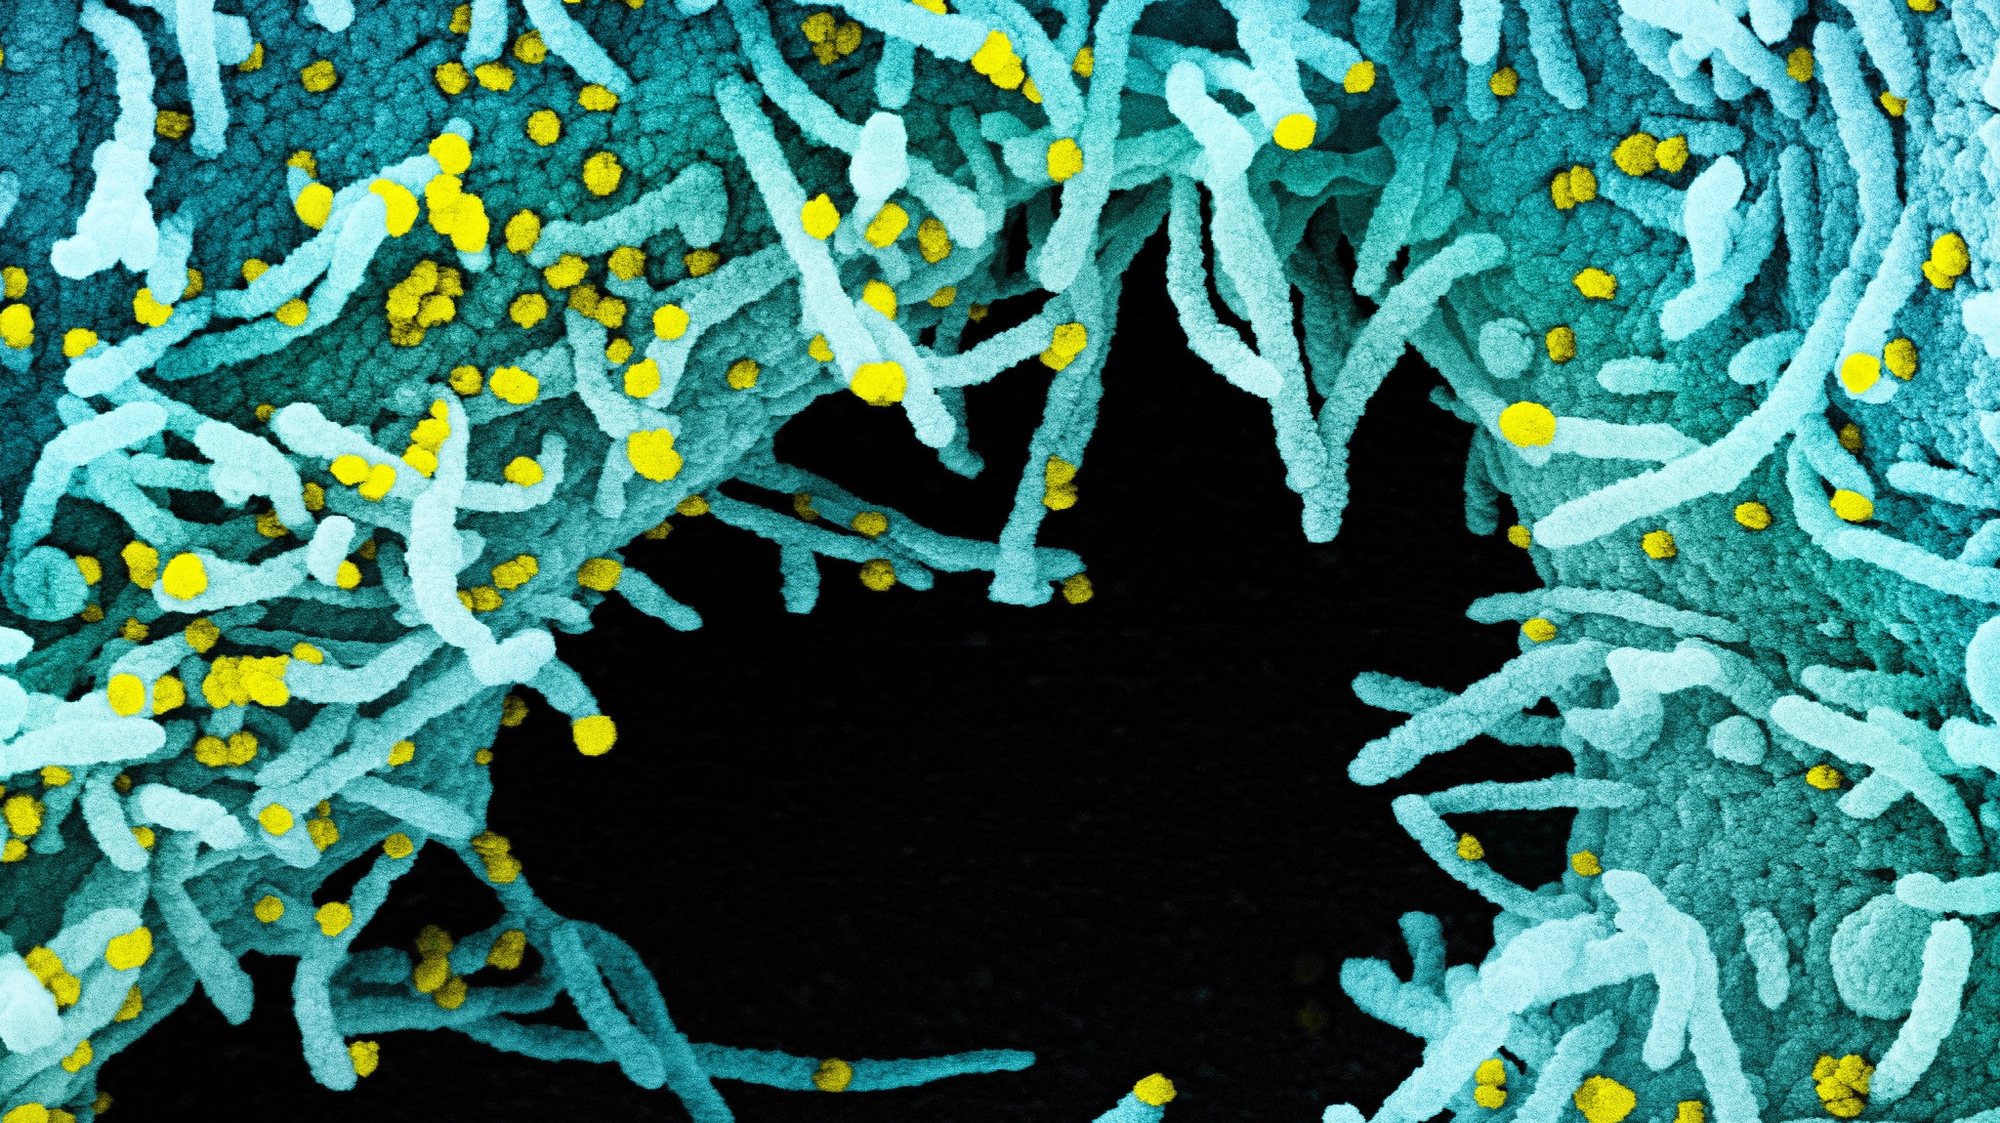 epa08546705 An undated handout image captured and color-enhanced at the National Institute of Allergy and Infectious Diseases (NIAID) Integrated Research Facility (IRF) in Fort Detrick, Maryland, USA and made available by the National Institutes of Health (NIH) shows a colorized scanning electron micrograph of a cell heavily infected with SARS-CoV-2 virus particles (yellow), isolated from a patient sample (issued 15 July 2020). The black area in the image is extracellular space between the cells. The novel coronavirus SARS-COV-2, which causes the COVID-19 disease, has been recognized as a pandemic by the World Health Organization (WHO) on 11 March 2020.  EPA/NIAID/NATIONAL INSTITUTES OF HEALTH HANDOUT  HANDOUT EDITORIAL USE ONLY/NO SALES *** Local Caption *** 56102666